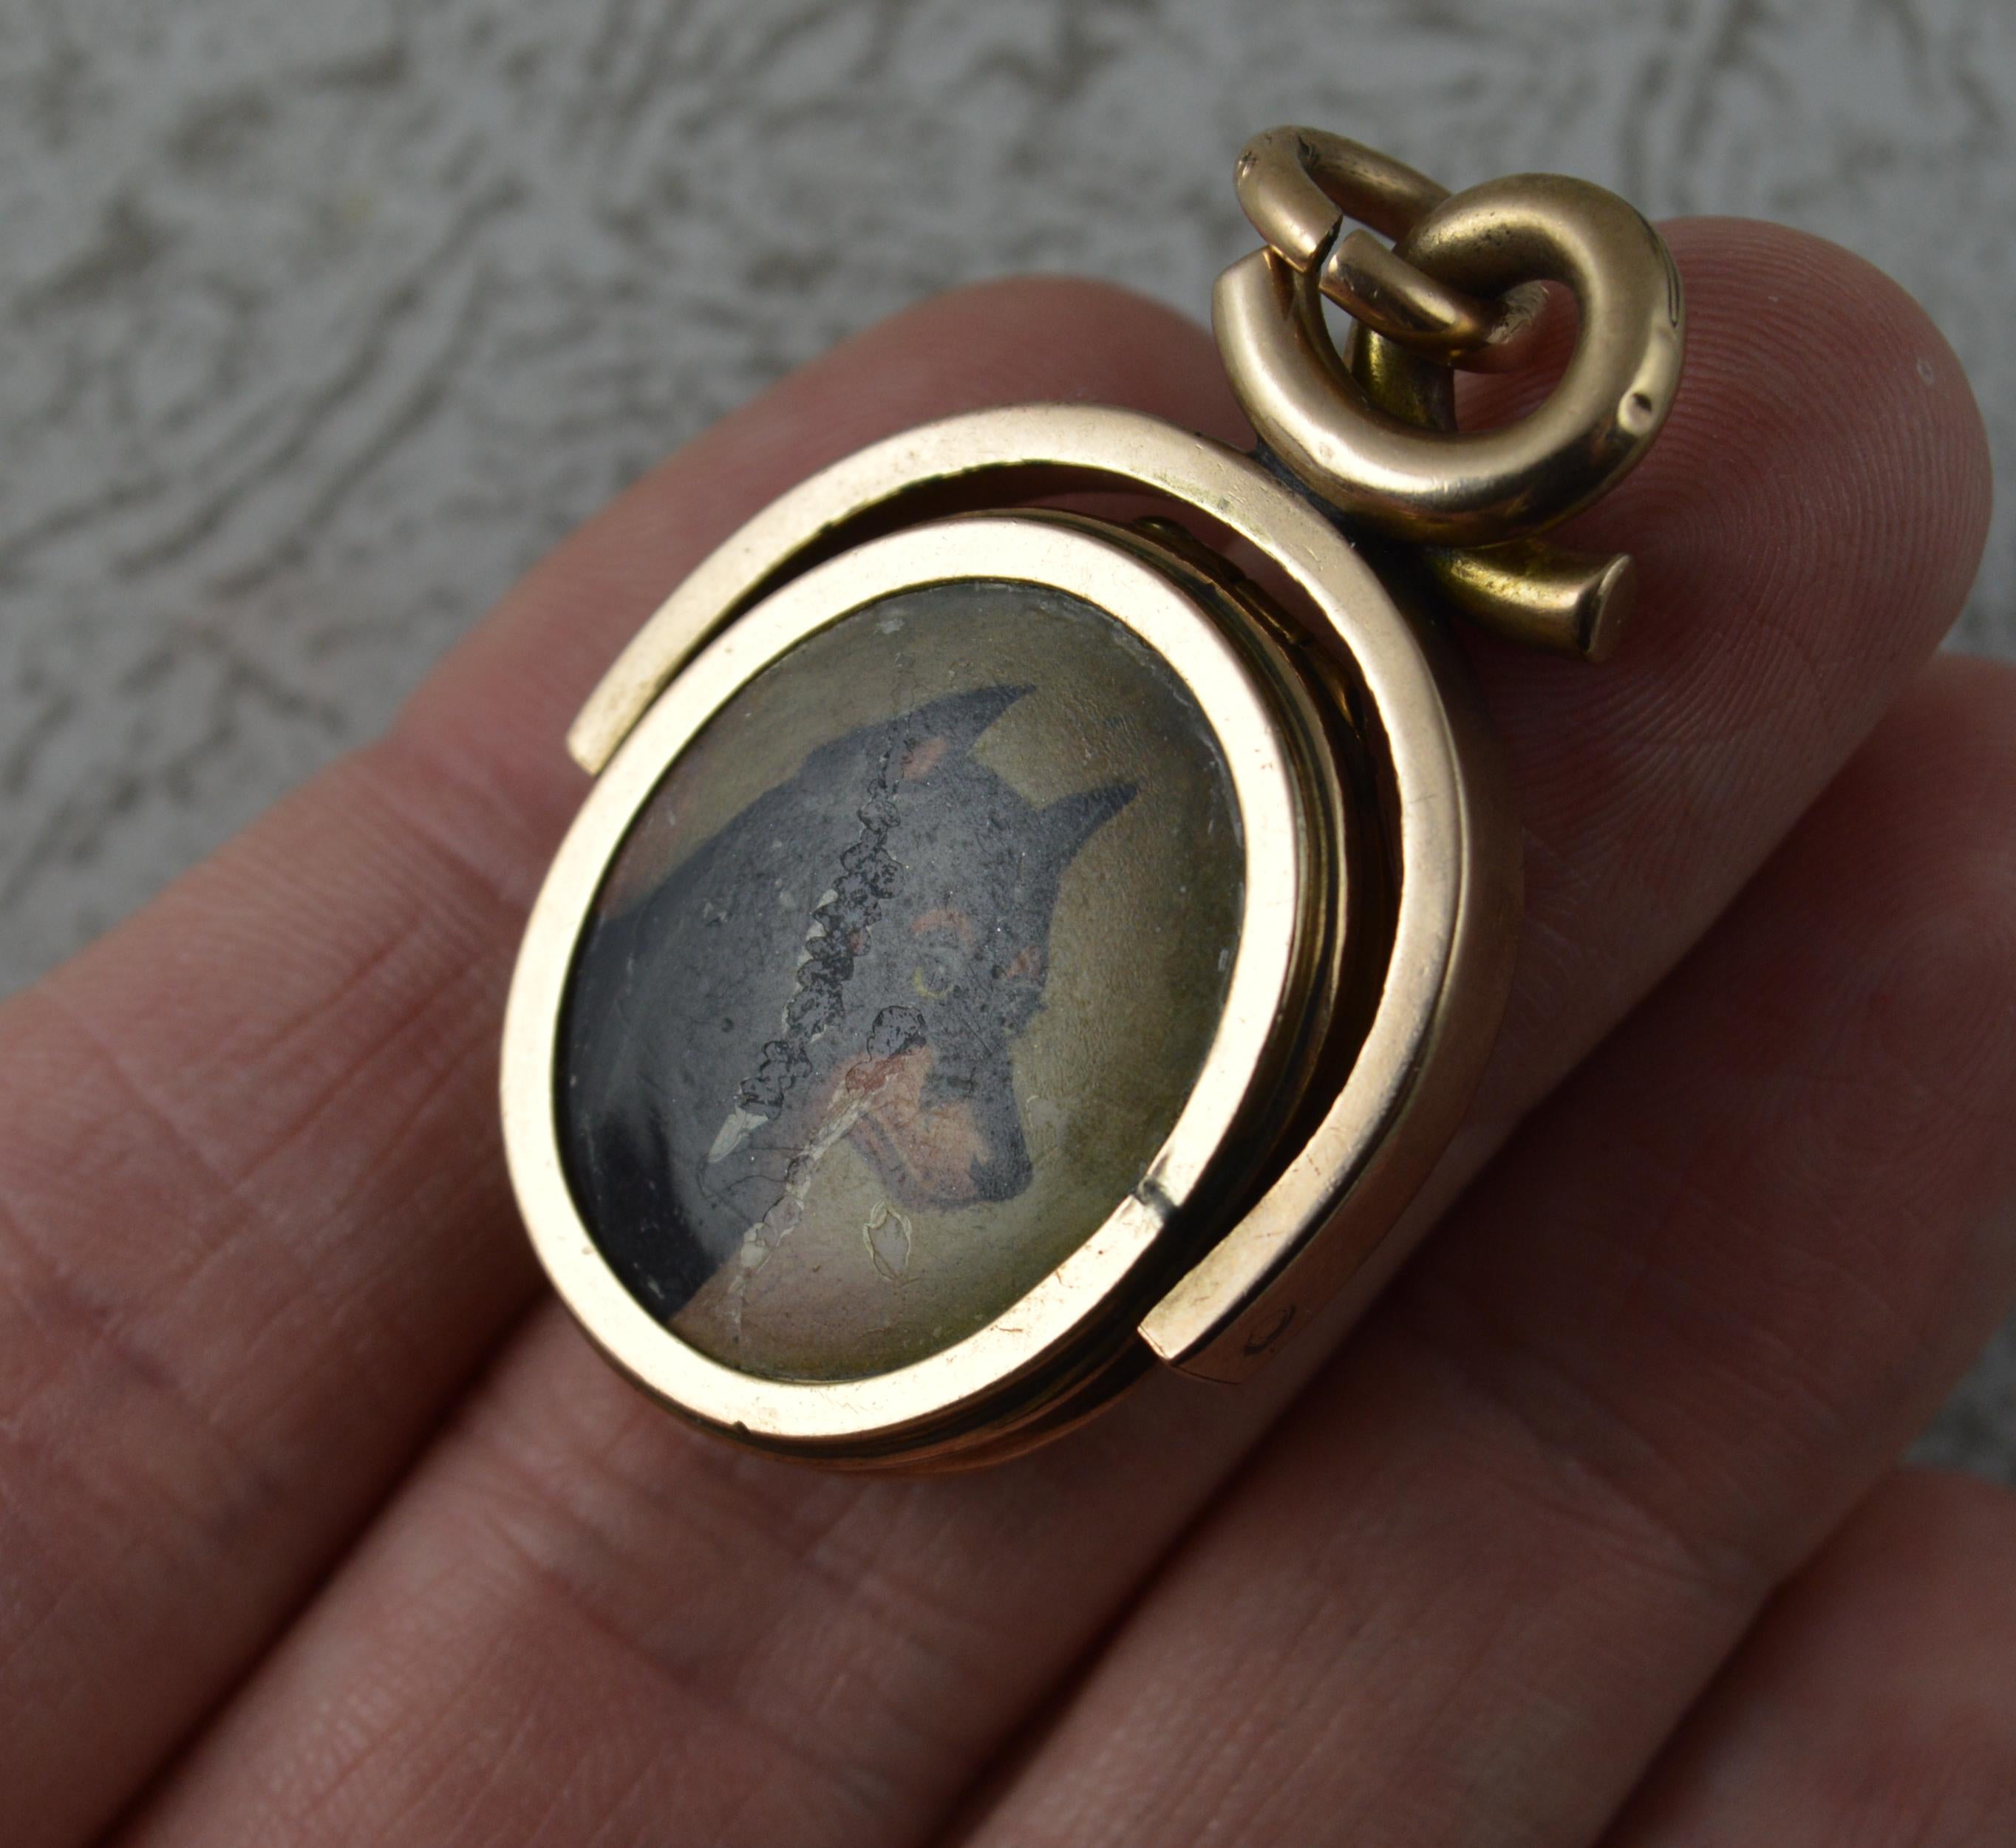 A fantastic Victorian period swivel fob pendant locket.
Modelled in 10 carat rose gold throughout. Stylish shape and design.
Designed with a large oval shaped carnelian to one side and hand painted plaque of a dog to the other which opens up to